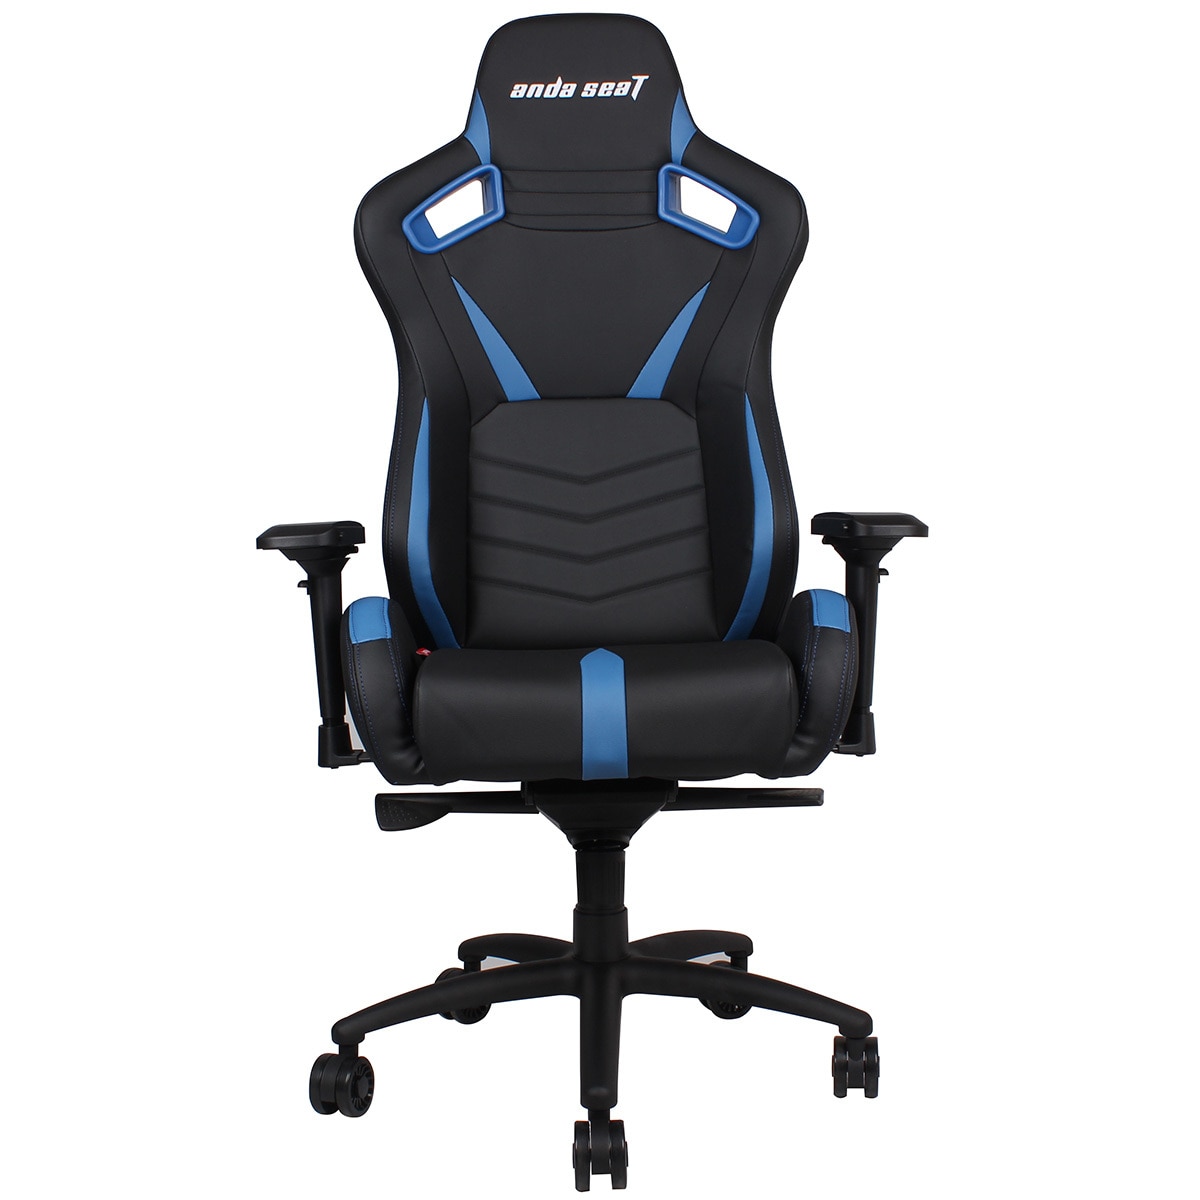 Anda Seat Extra Large Gaming Chair AD12XL-03 | Costco Australia